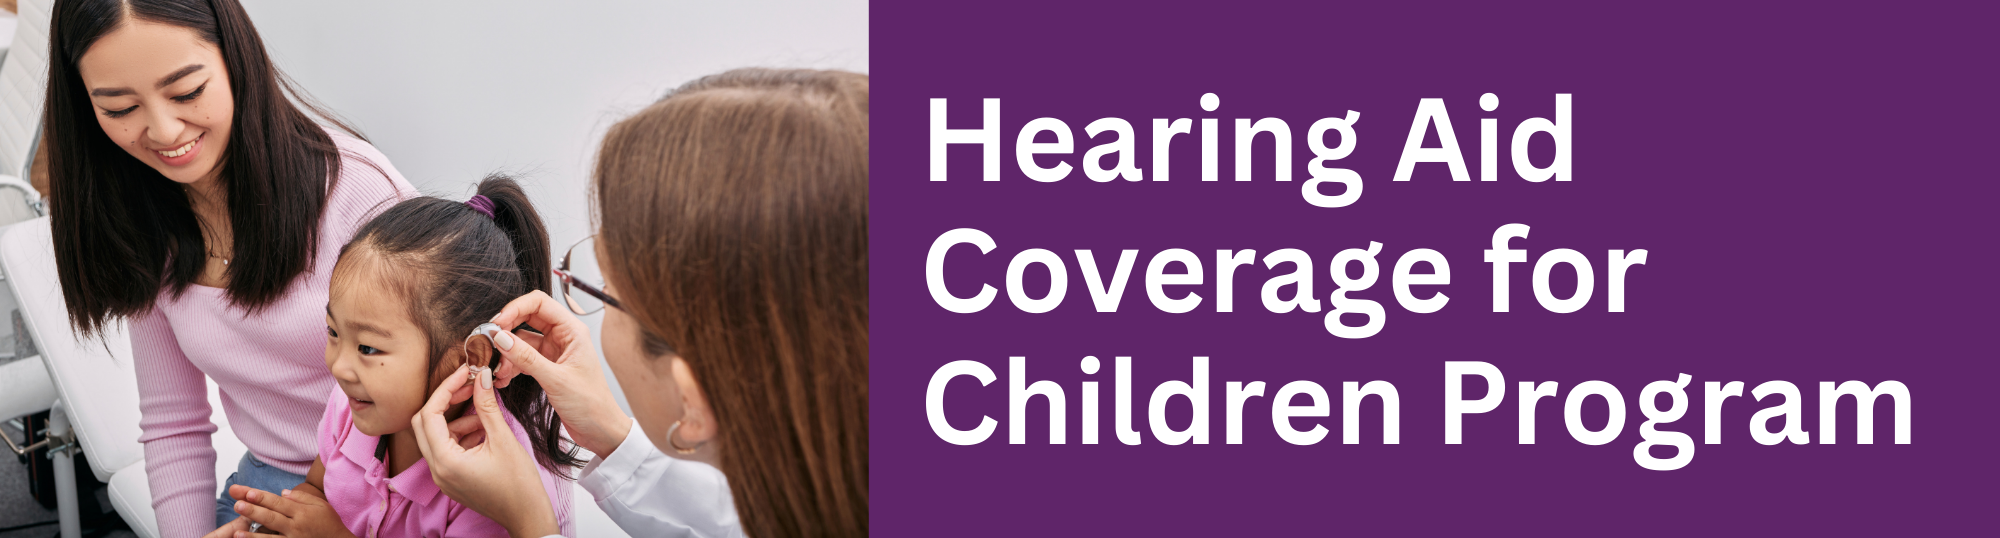 Hearing Aid Coverage for Children